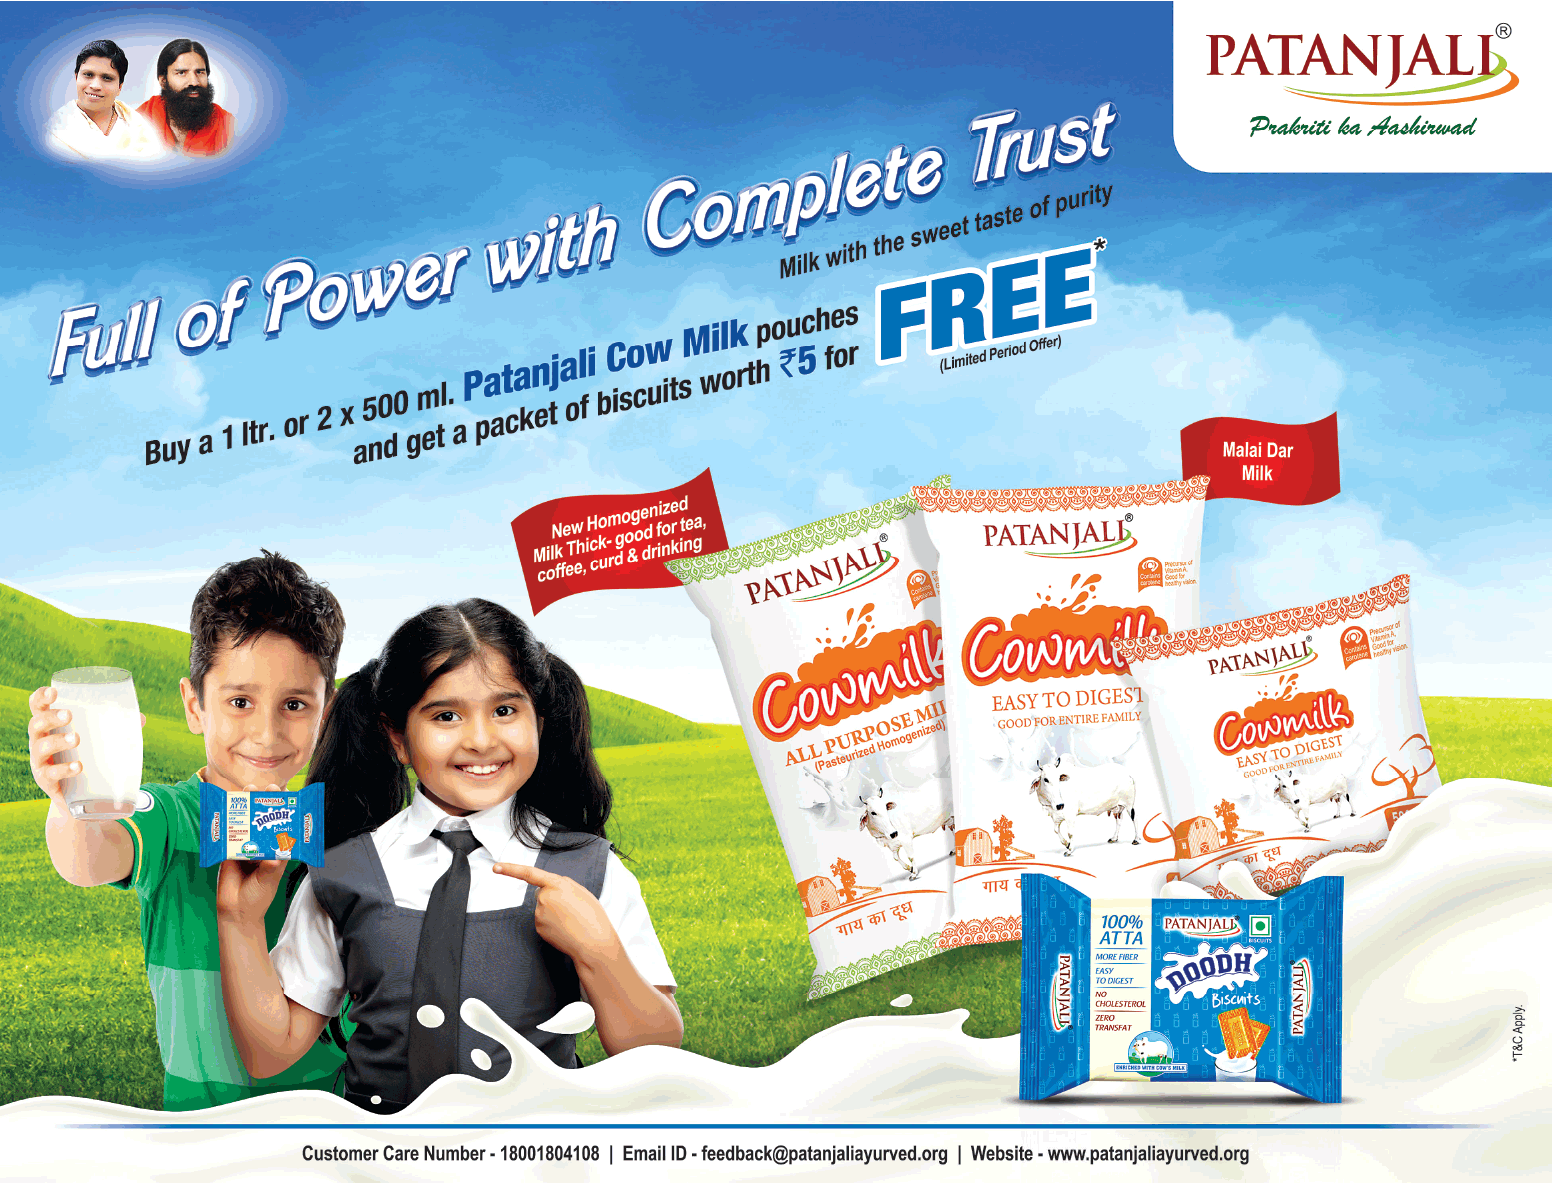 patanjali-cow-milk-full-of-power-with-complete-trust-ad-delhi-times-21-02-2019.png